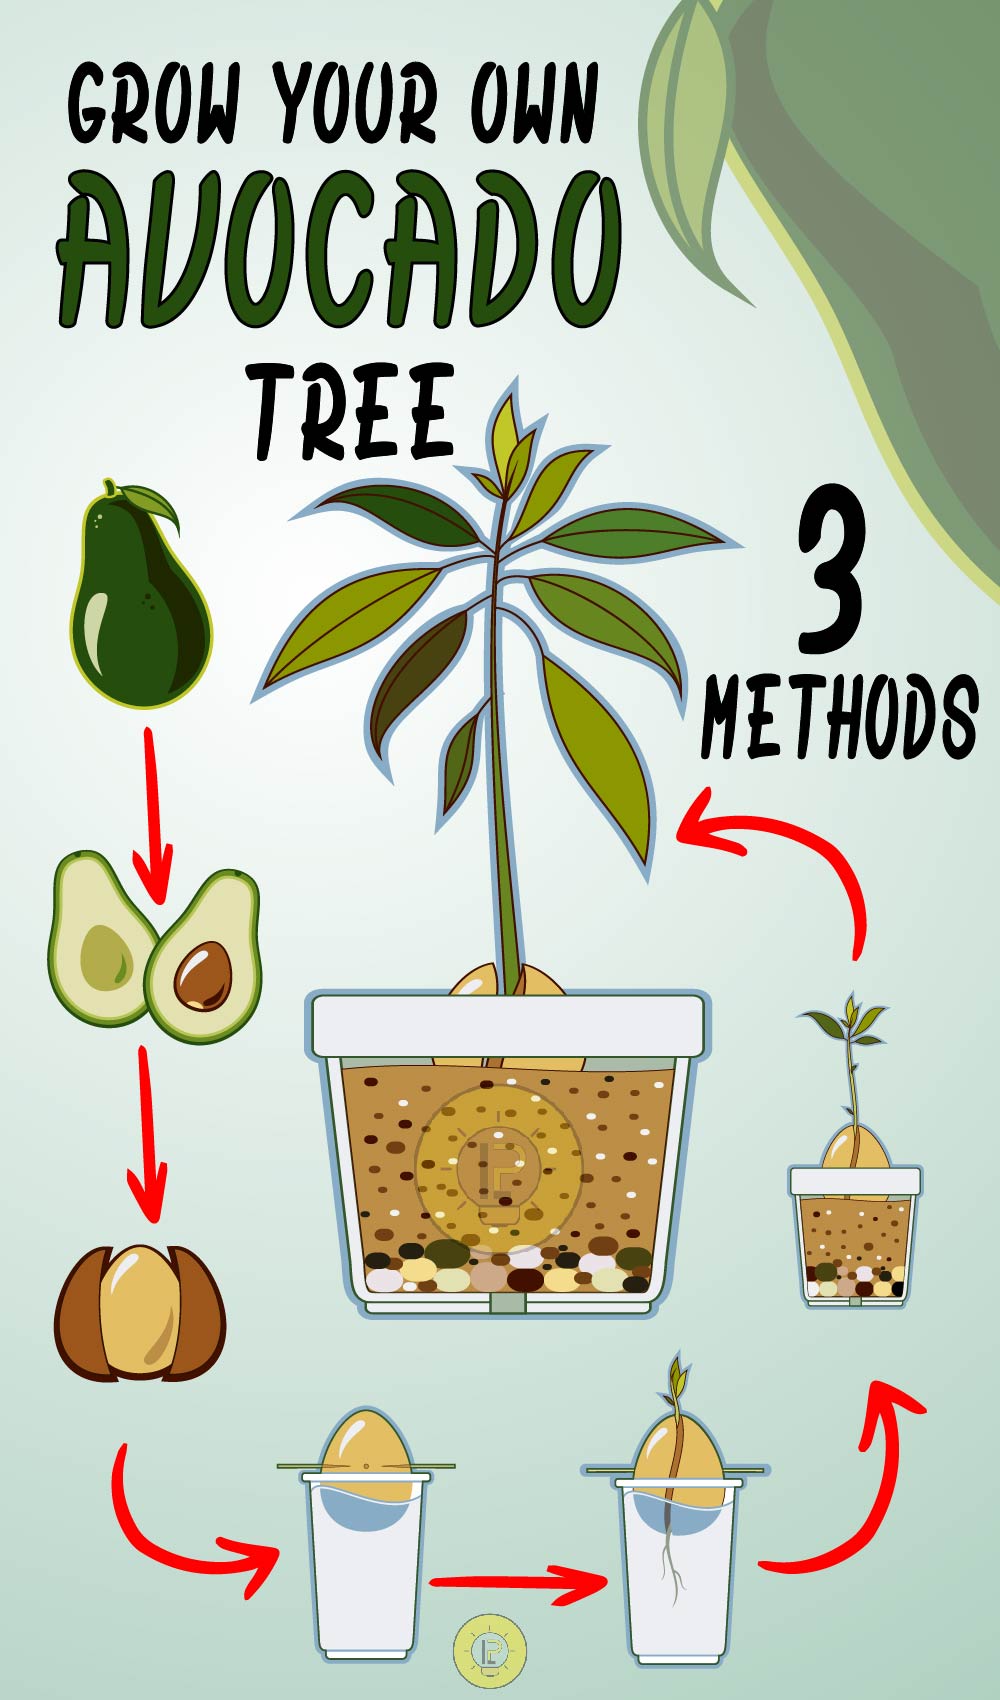 HOW TO GROW YOUR OWN AVOCADO TREE 01